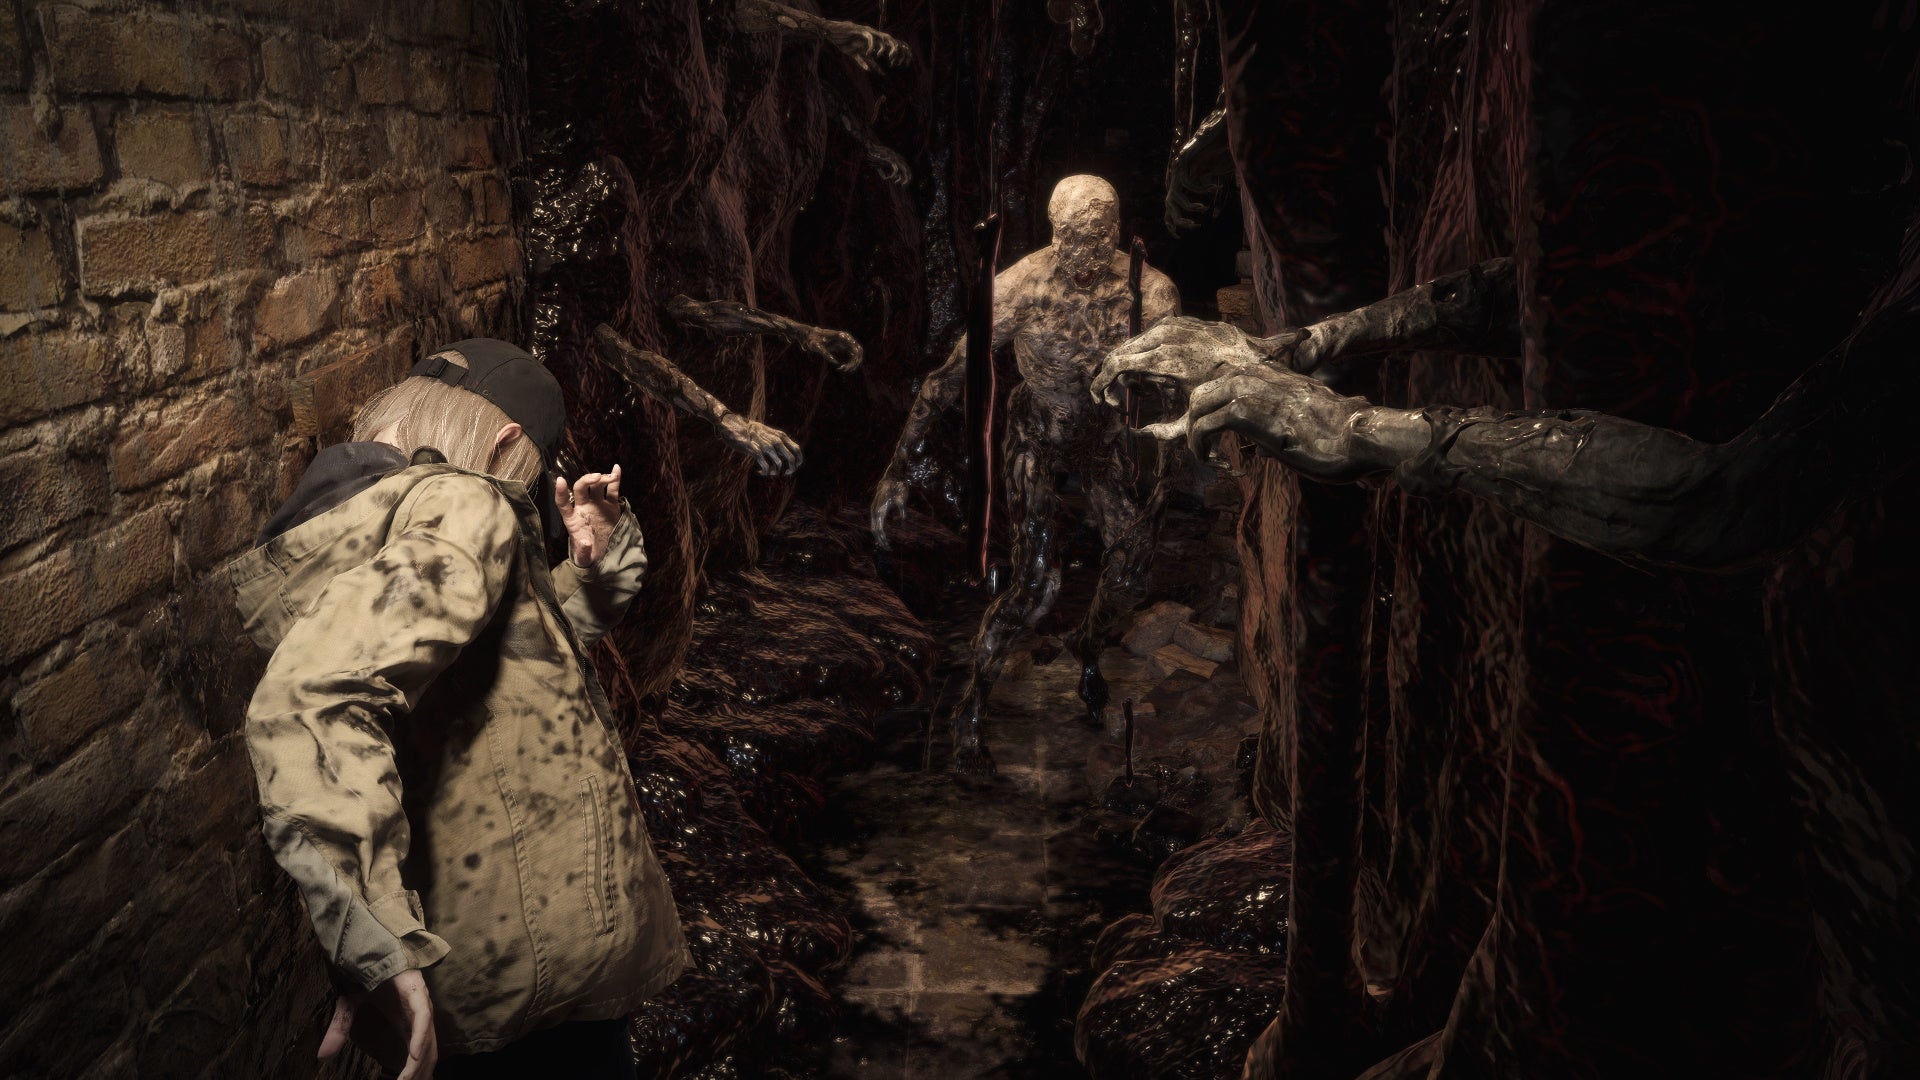 A pale-haired girl stumbles through mud and blood in a gorge with zombies in front of her in Resident Evil Village's Shadows Of Rose bundle.